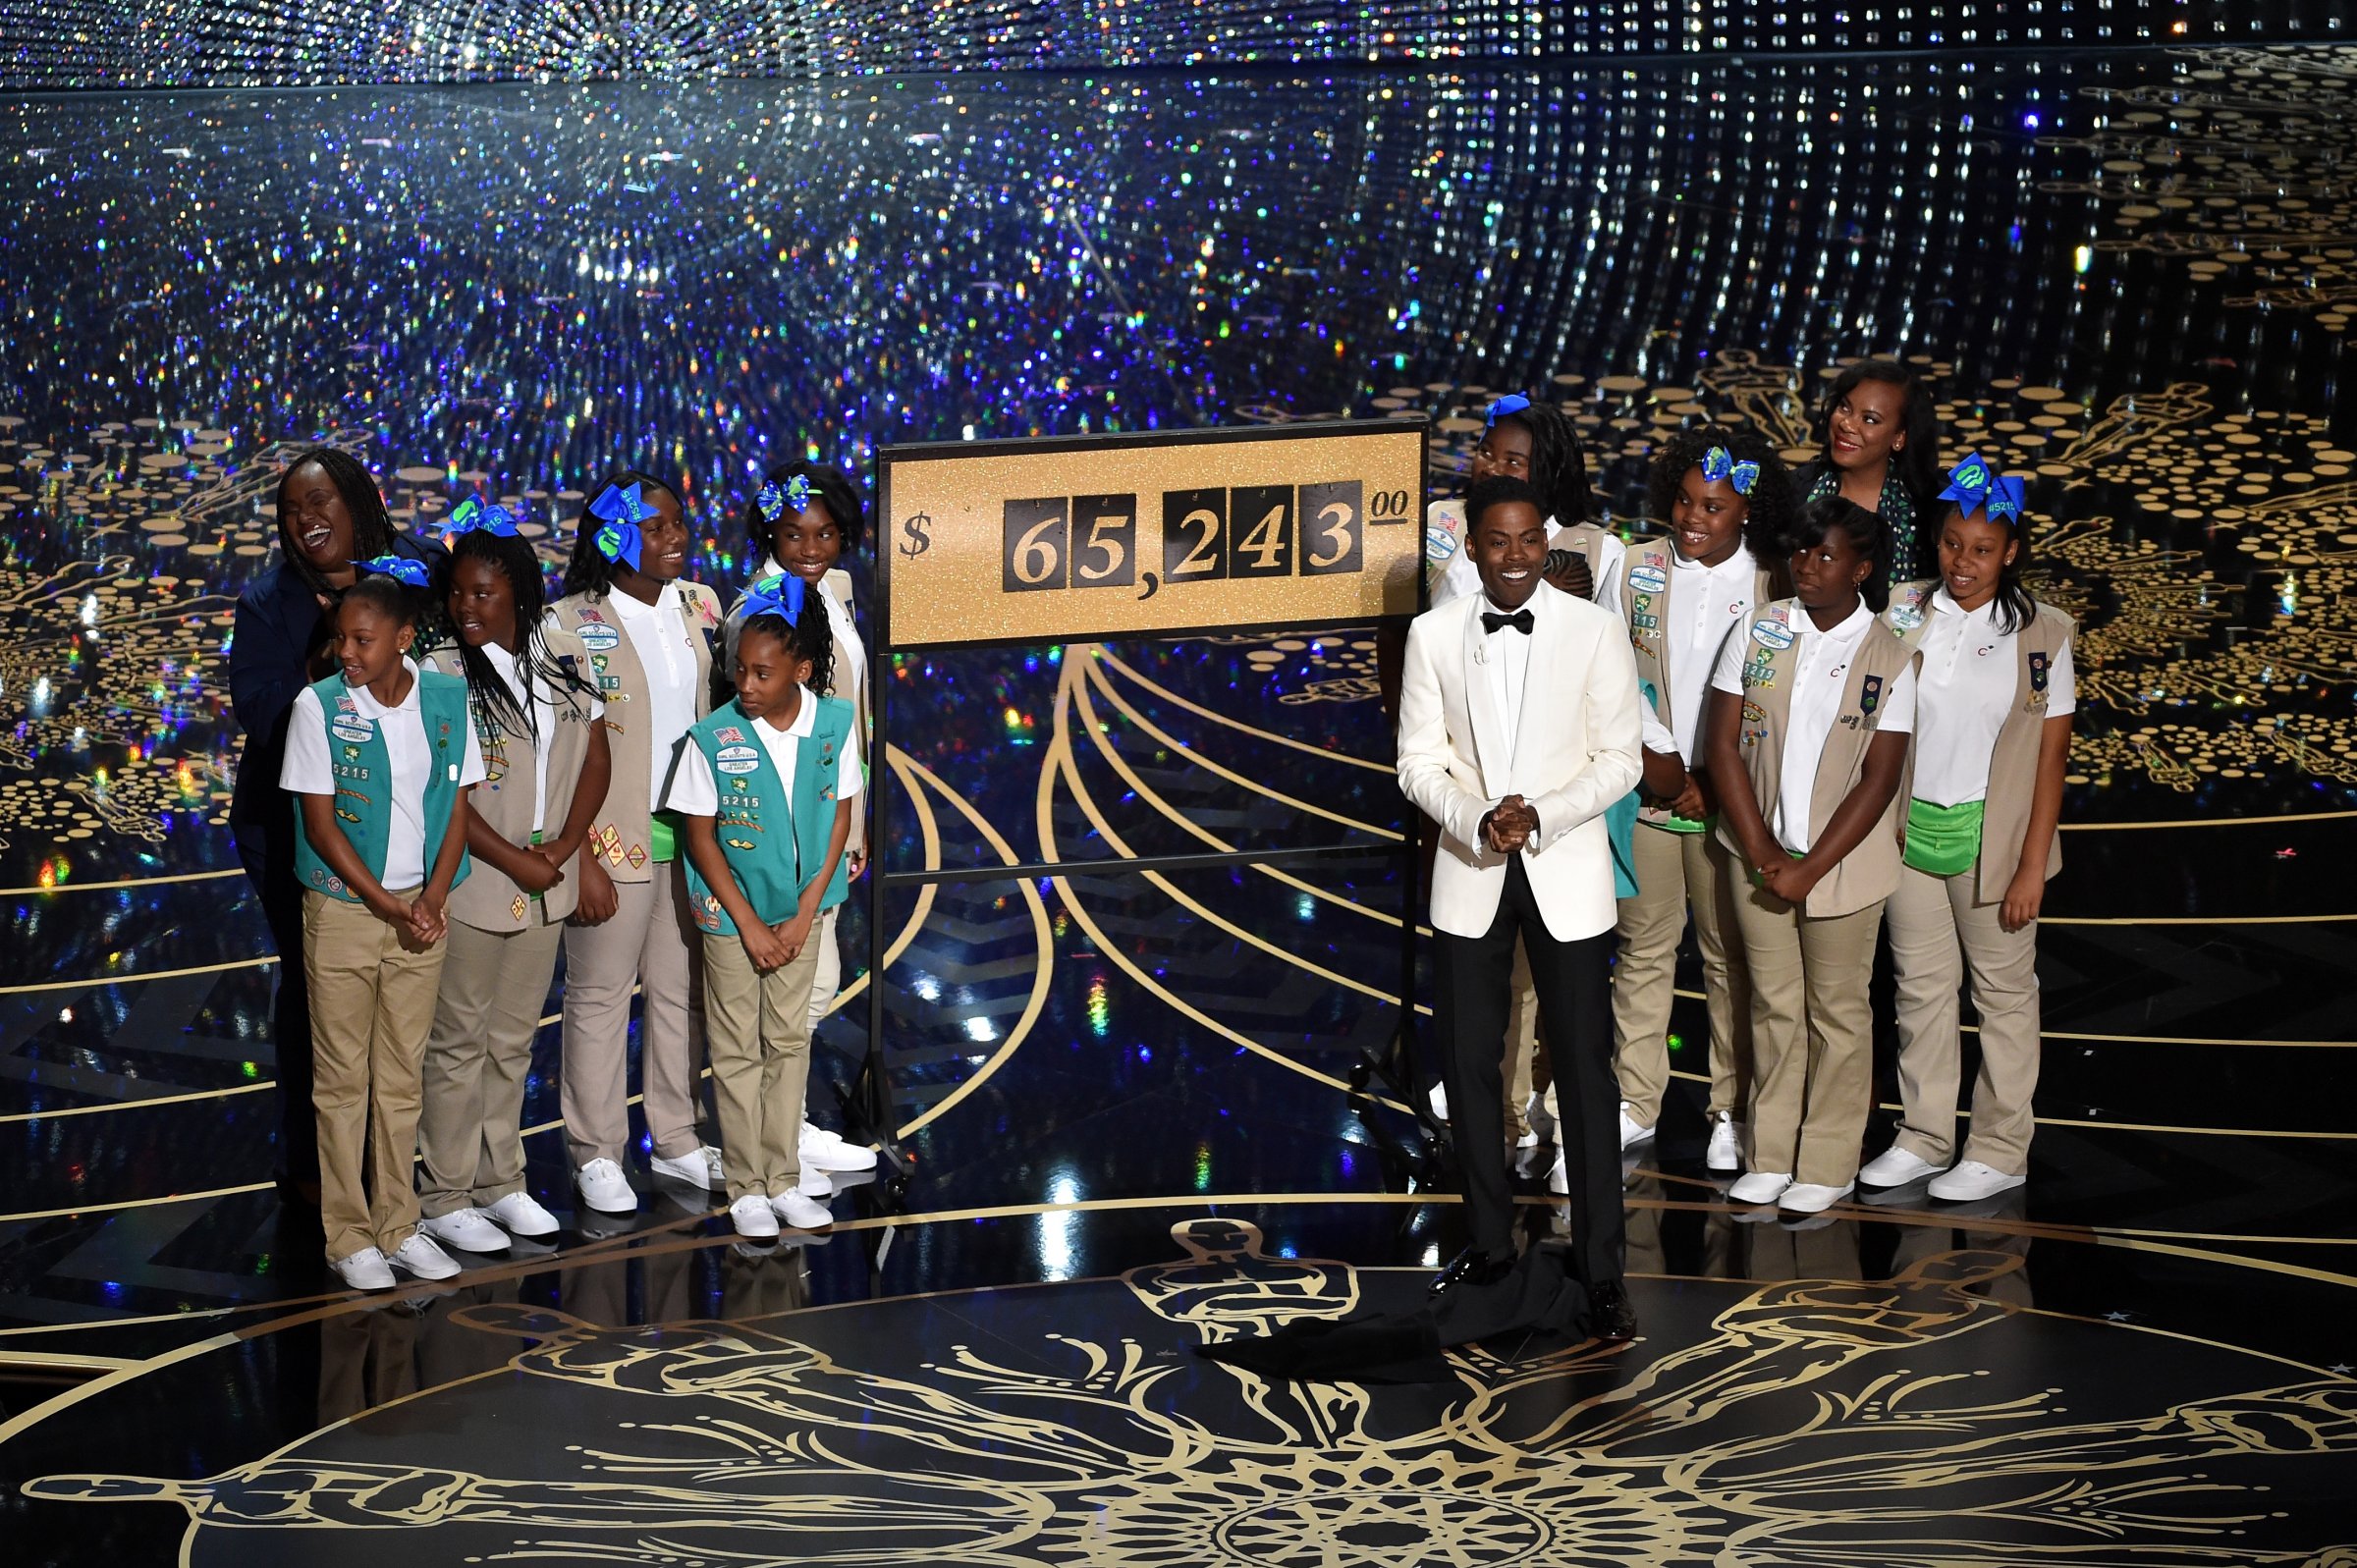 Host Chris Rock (C) presents the amount of money collected during the show by the Girl Scouts, including Rock's daughters Zahra and Lola, onstage at the 88th Annual Academy Awards at the Dolby Theatre on February 28, 2016 in Hollywood, California.